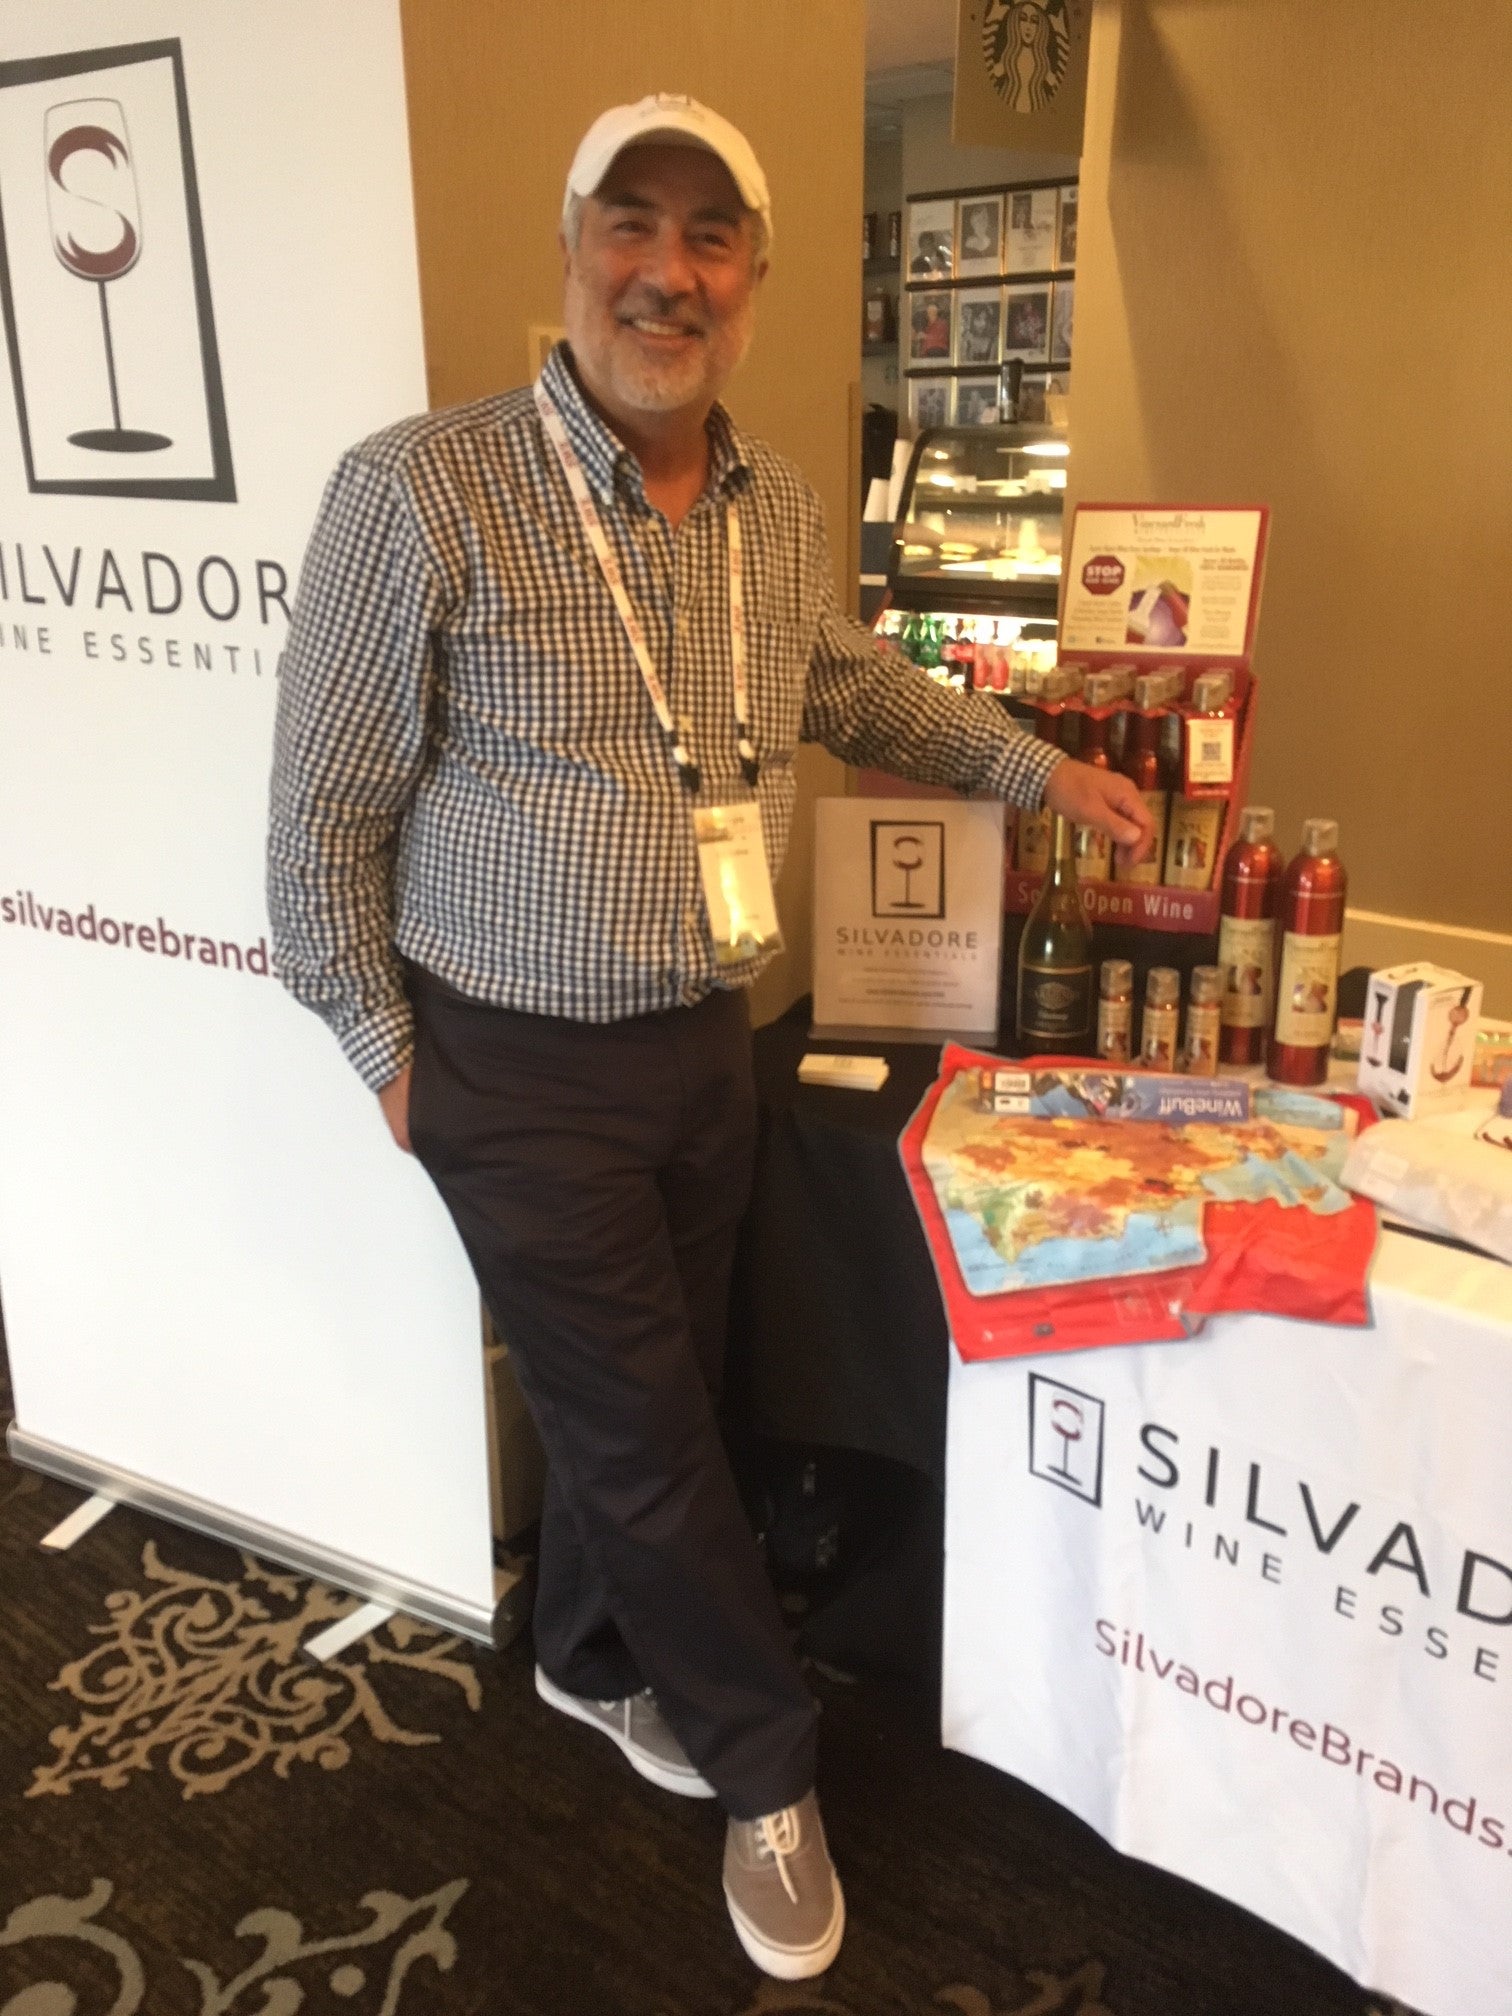 Gary at the Society of Wine Educators Conference, New York Finger Lakes, August 2018